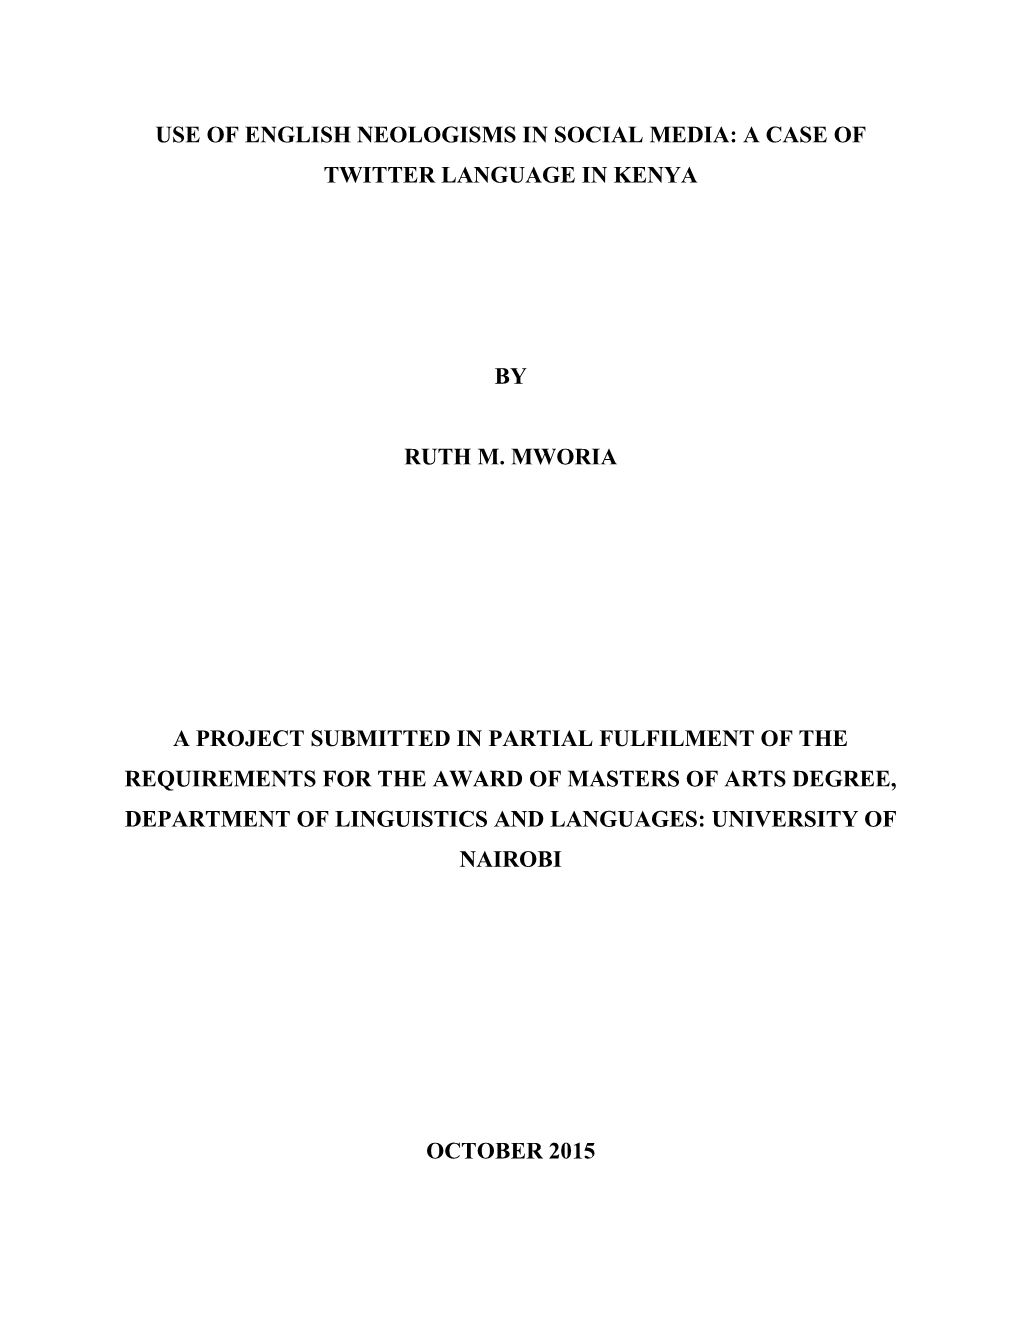 Use of English Neologisms in Social Media: a Case of Twitter Language in Kenya